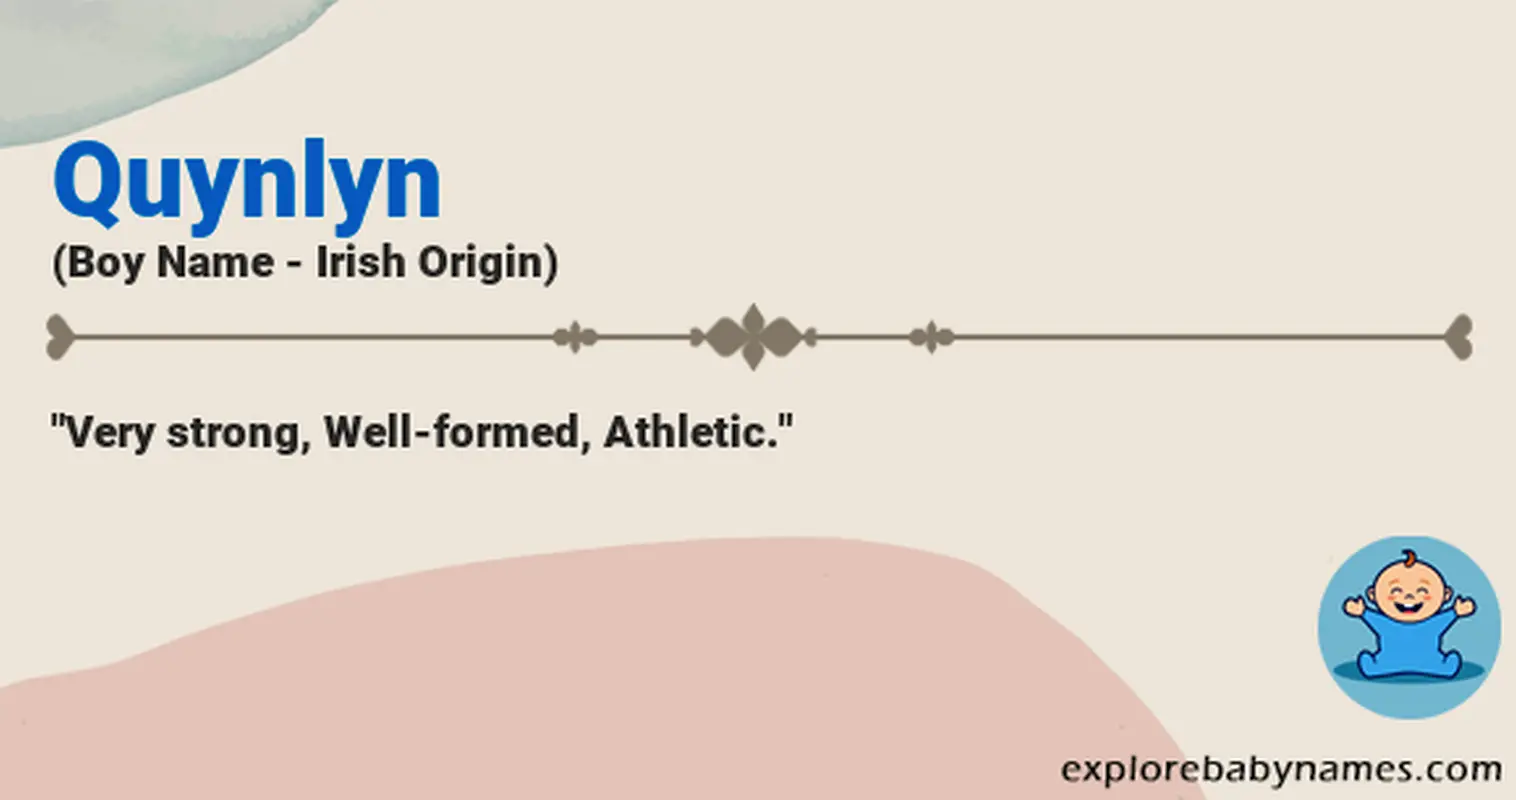 Meaning of Quynlyn